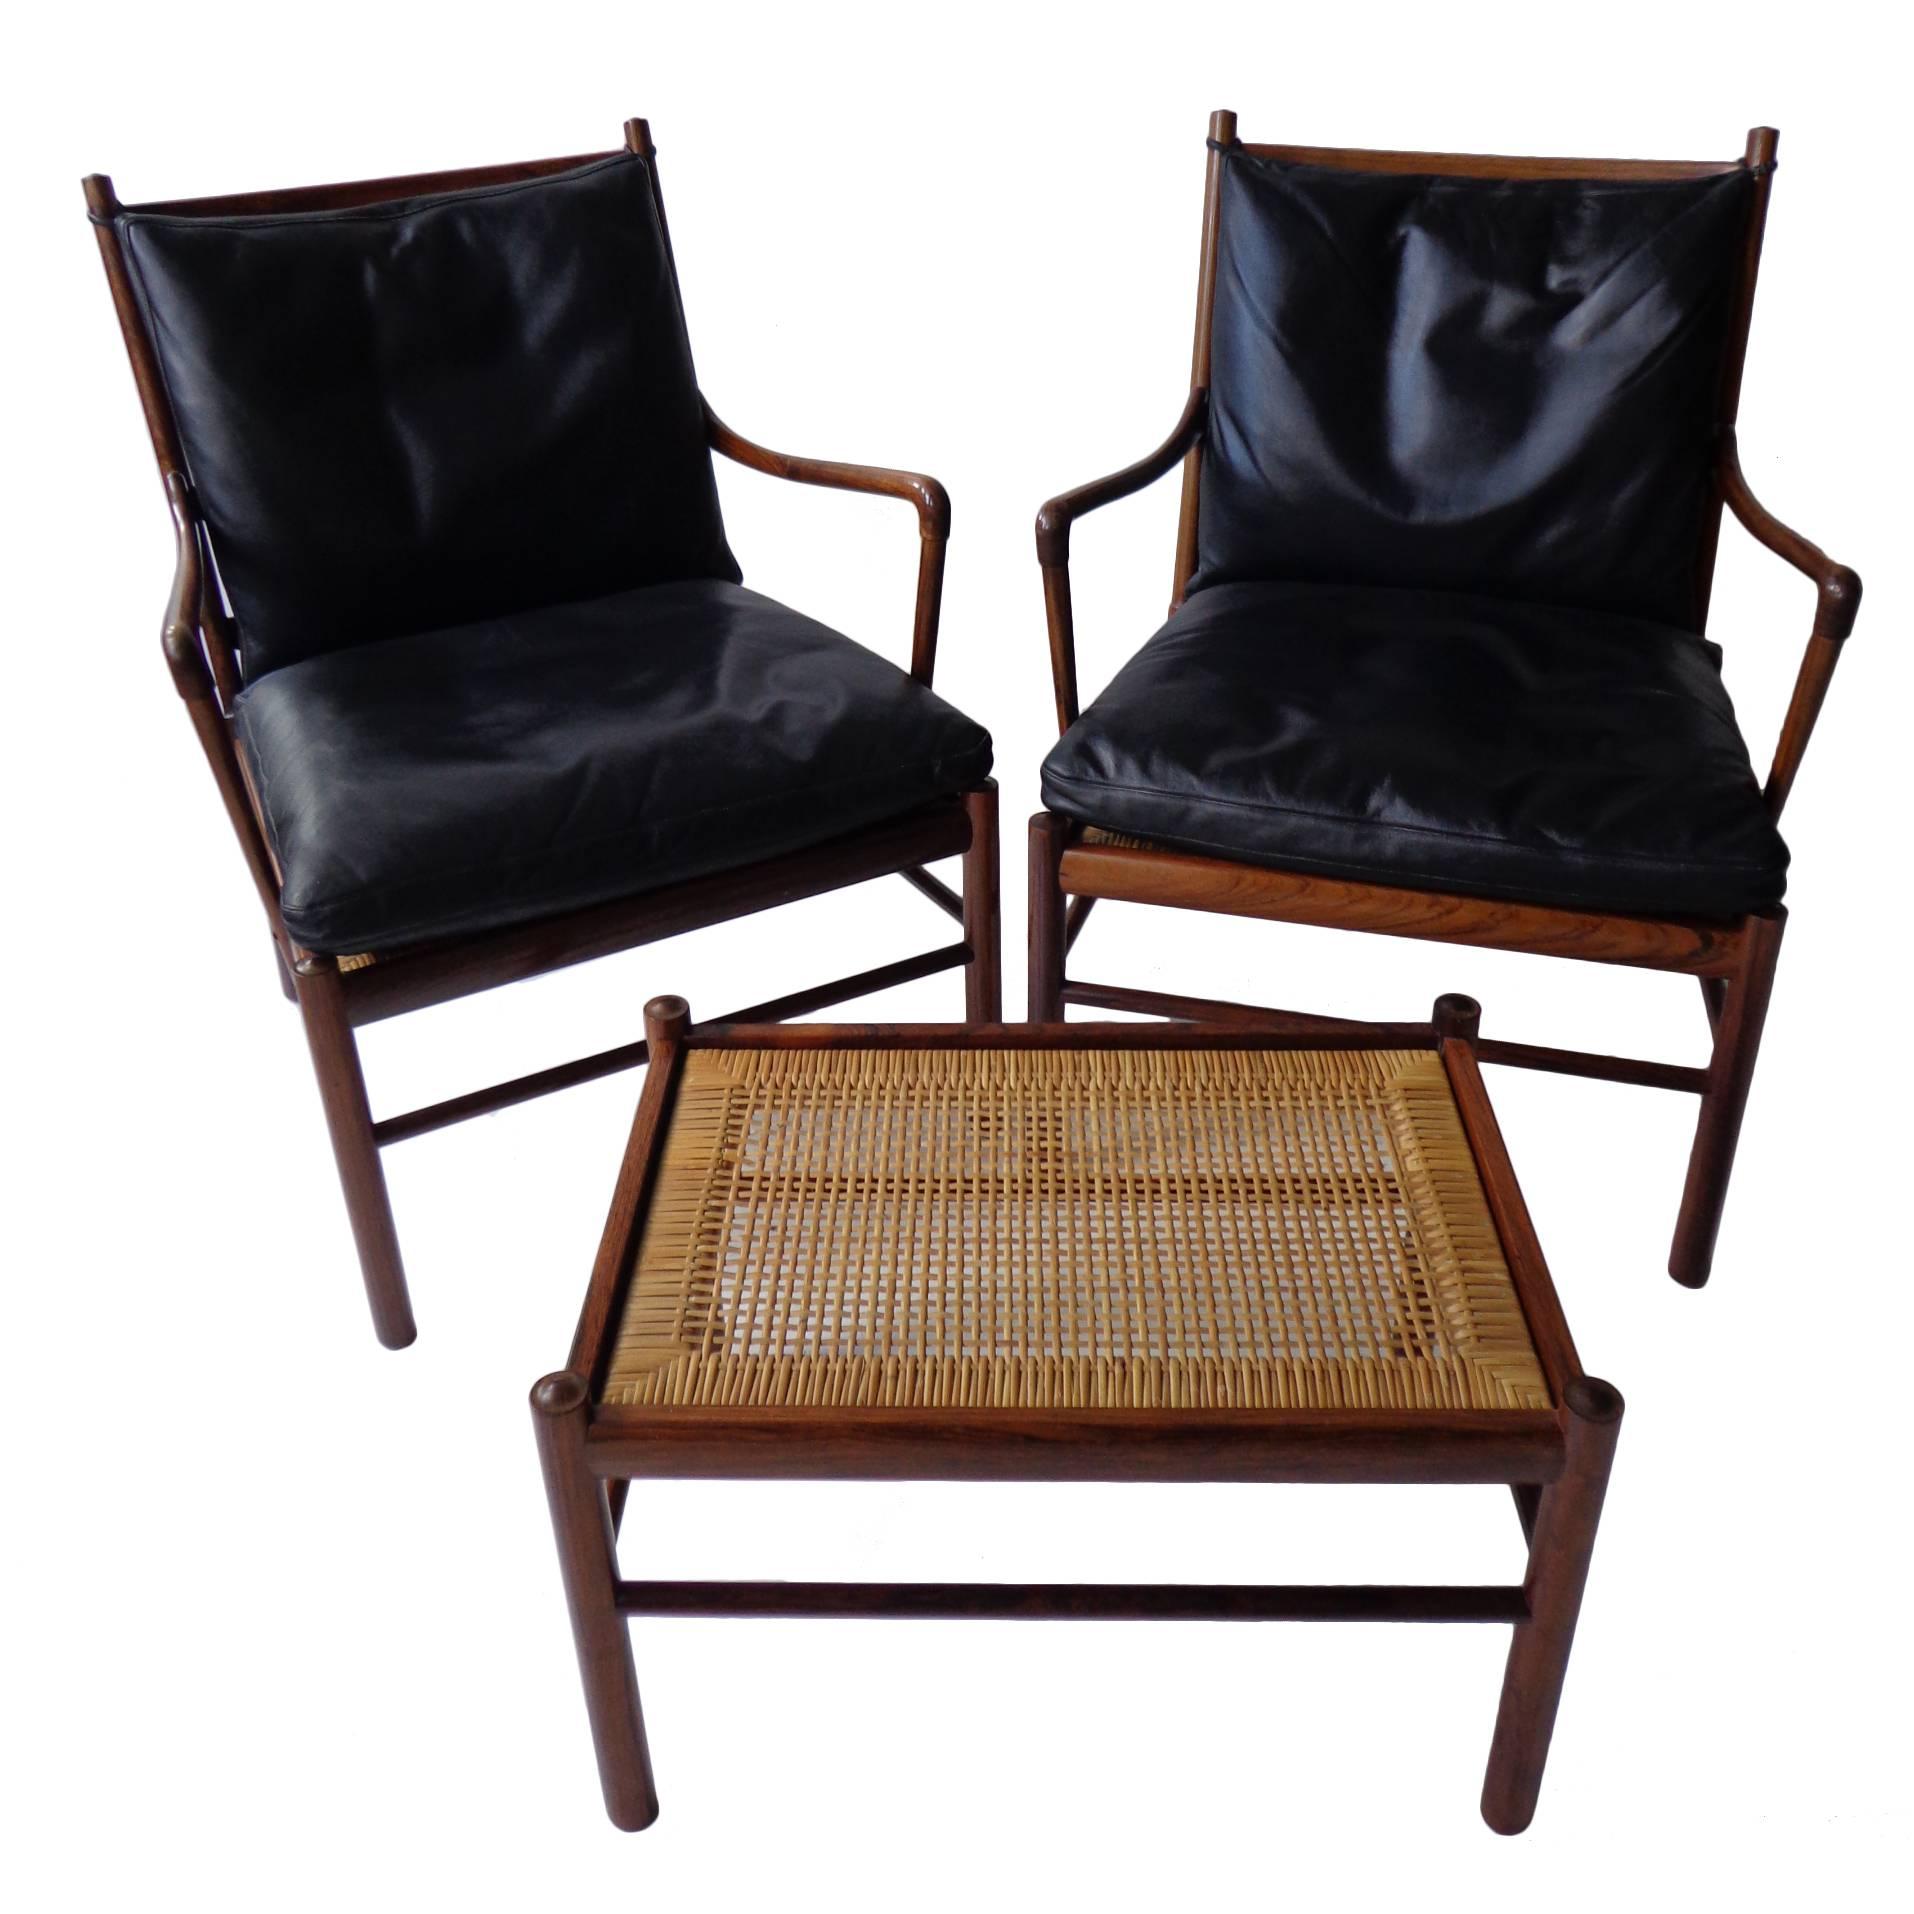 The elegant simplicity of these chairs shows Wanscher at his best. The seat is made of woven cane and its cushion of original black leather is filled with feathers. The Colonial chairs are elegant works finished to a high level of perfection.
The